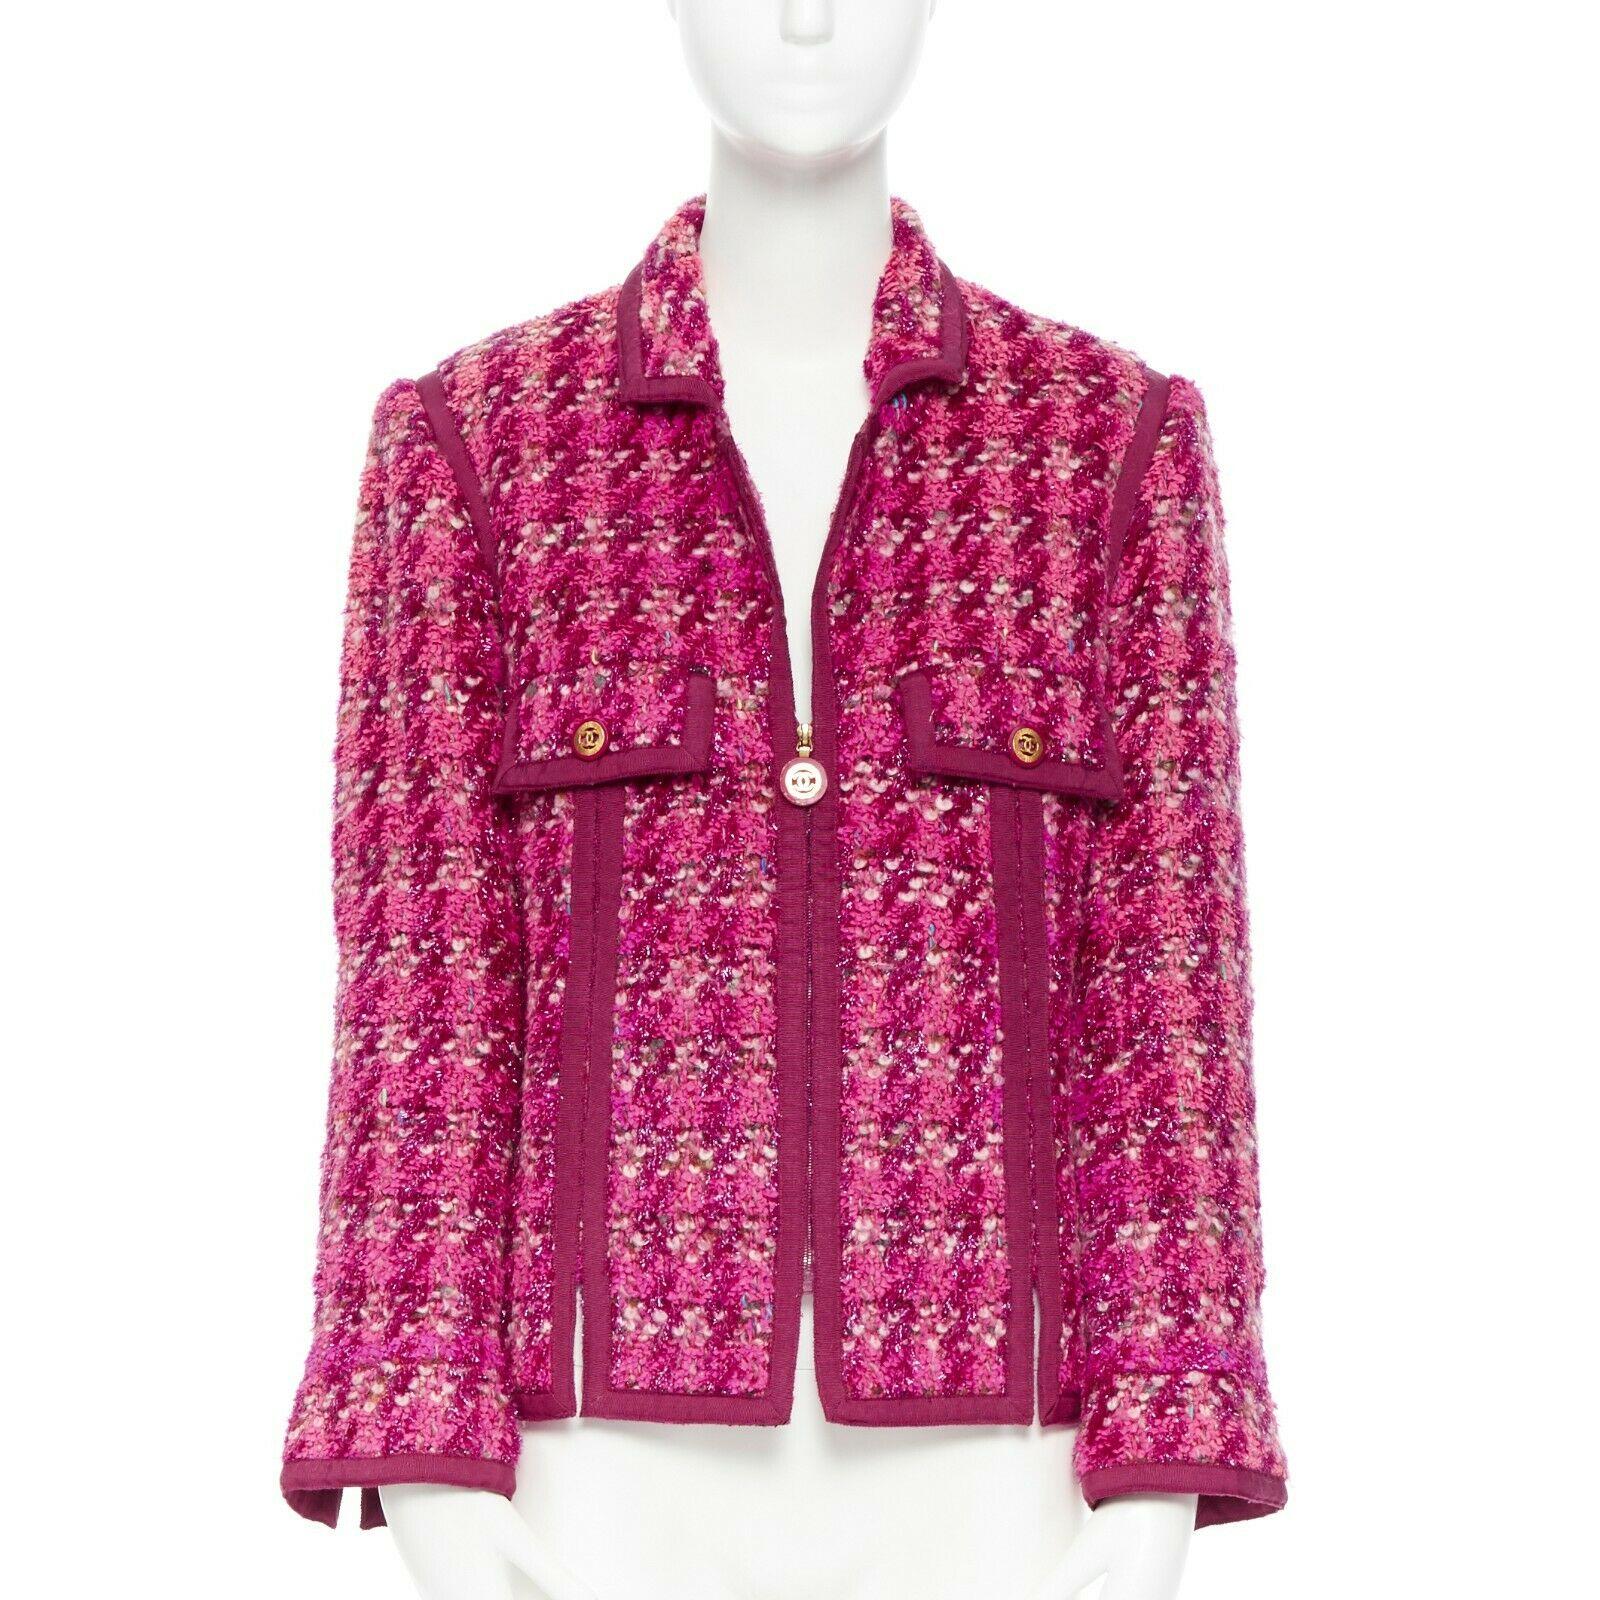 runway CHANEL Vintage pink magenta fuchsia texture wool blend tweed zip jacket
Brand: CHANEL
Designer: Karl Lagerfeld
Collection: Circa 1990's
As seen on: Linda Evangelista
Model Name / Style: Tweed jacket
Material: Other; composition label removed.